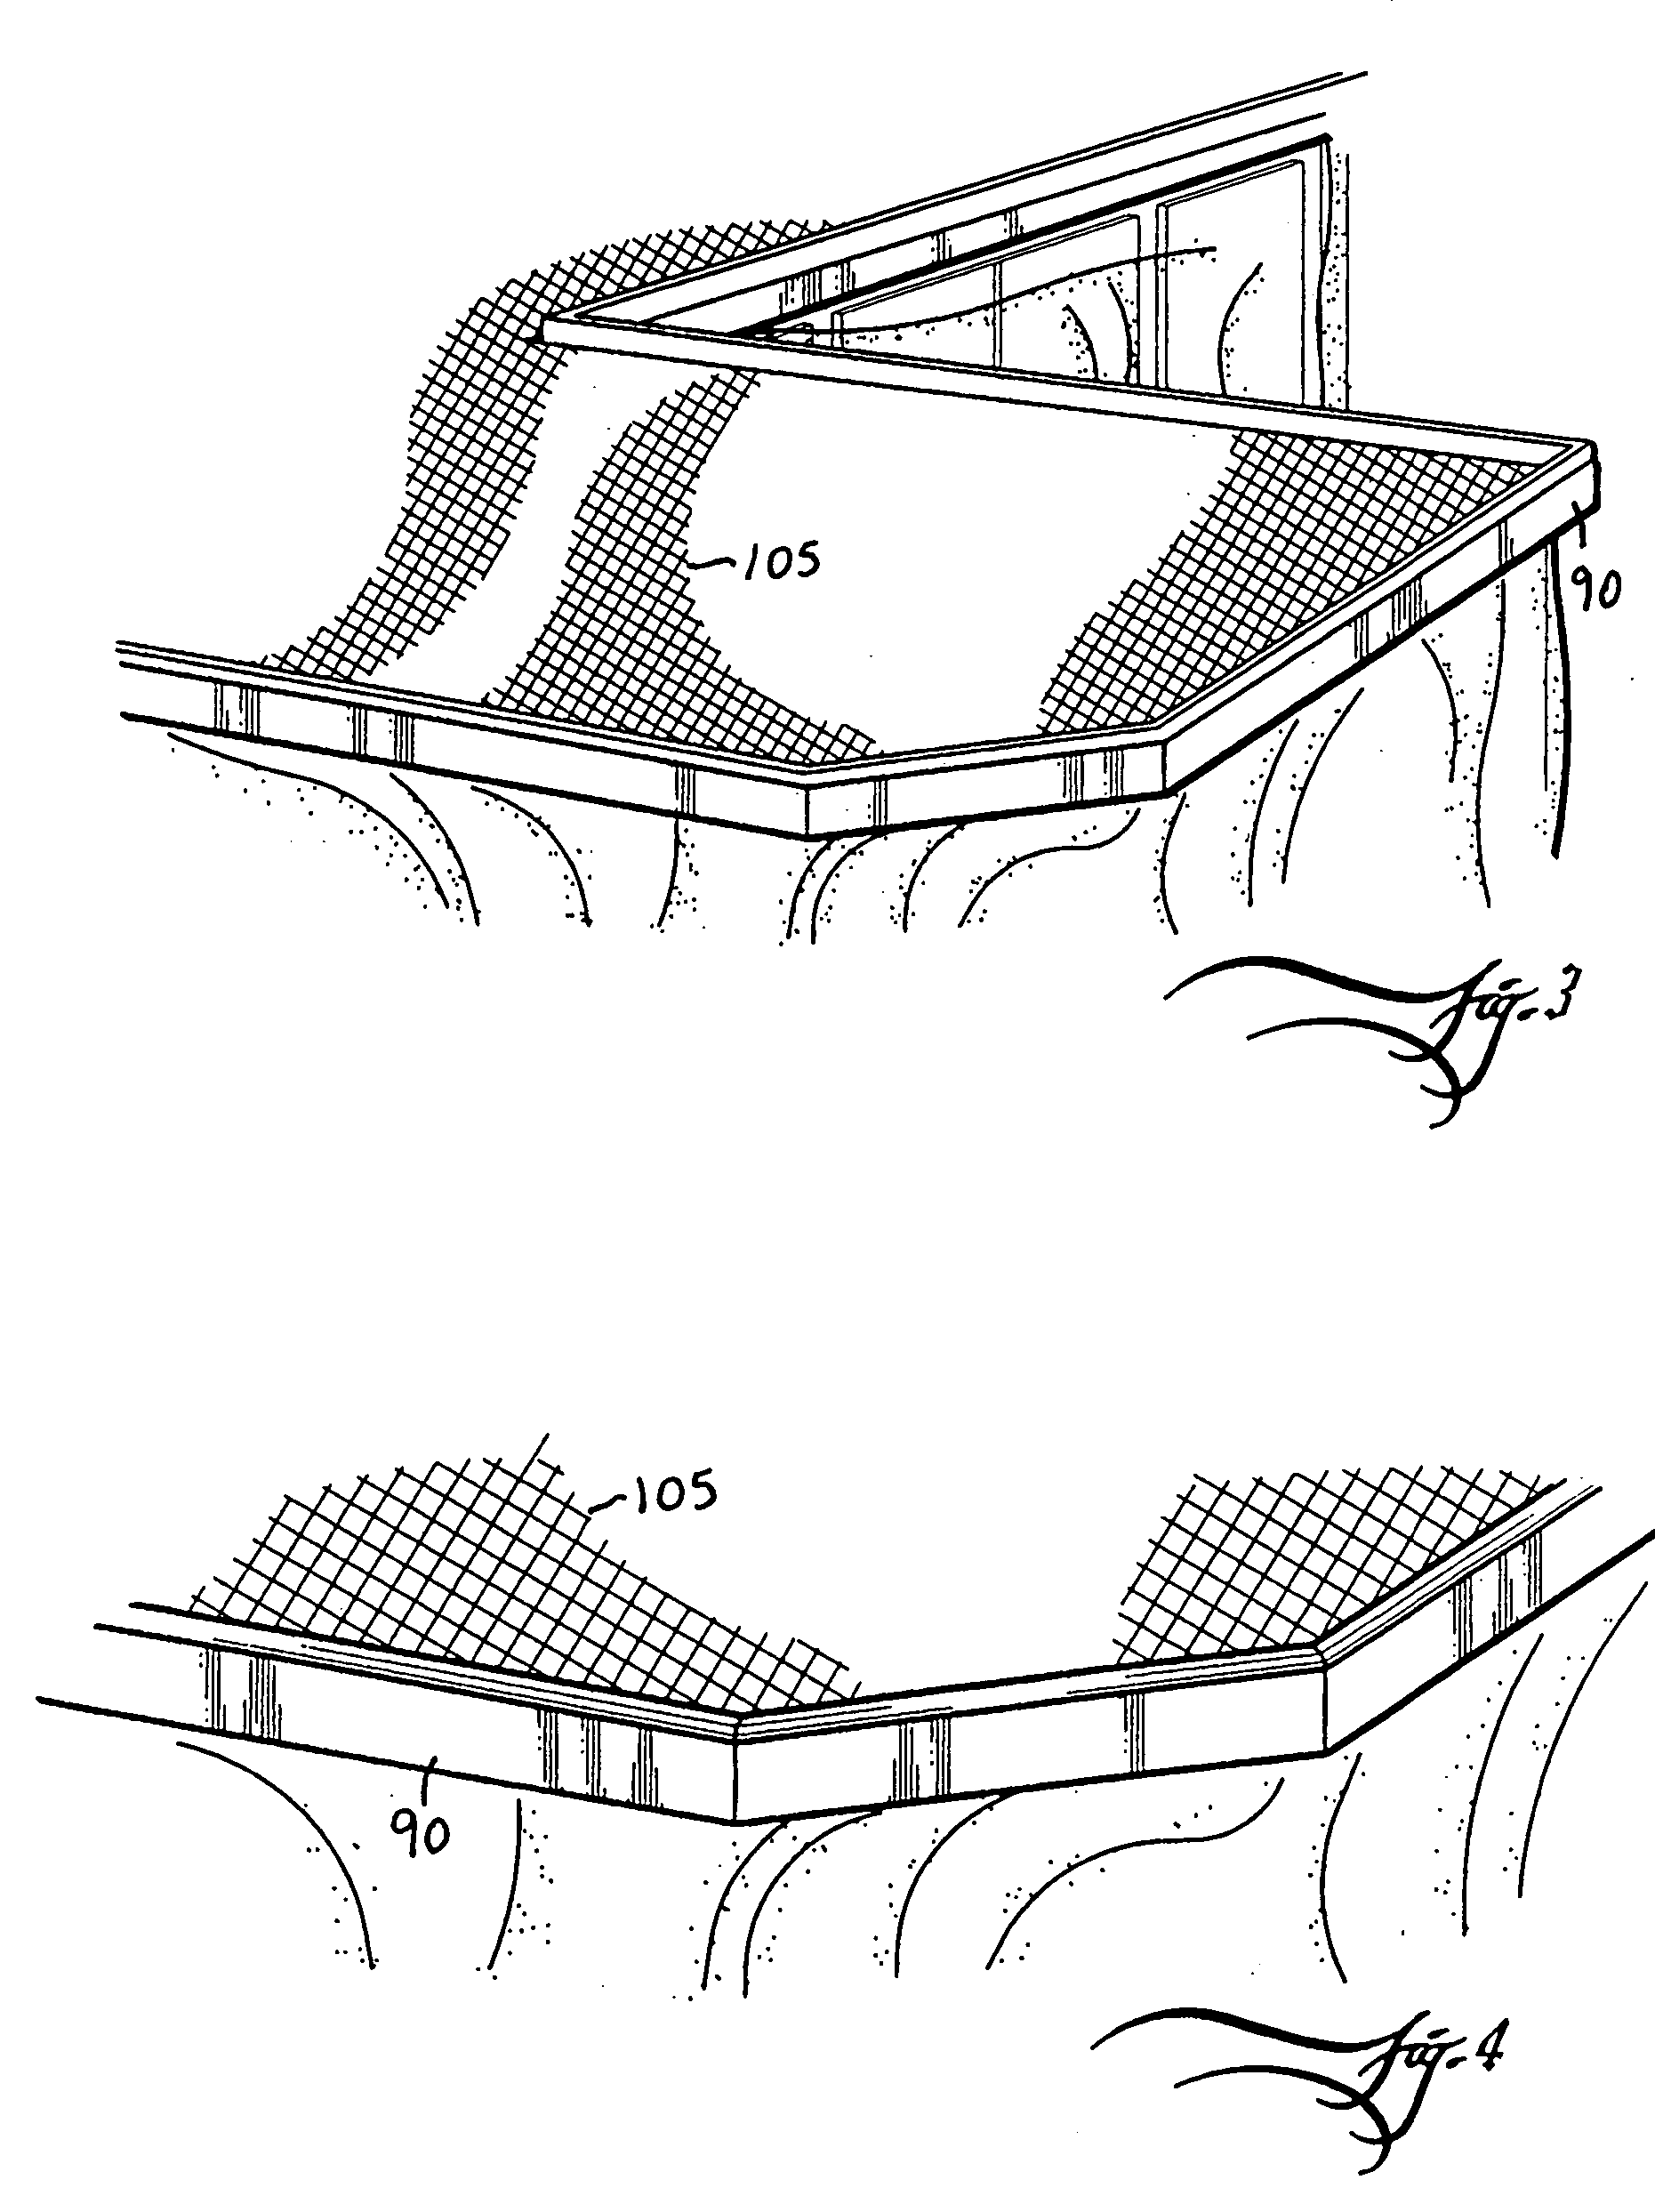 Method of remodeling a countertop